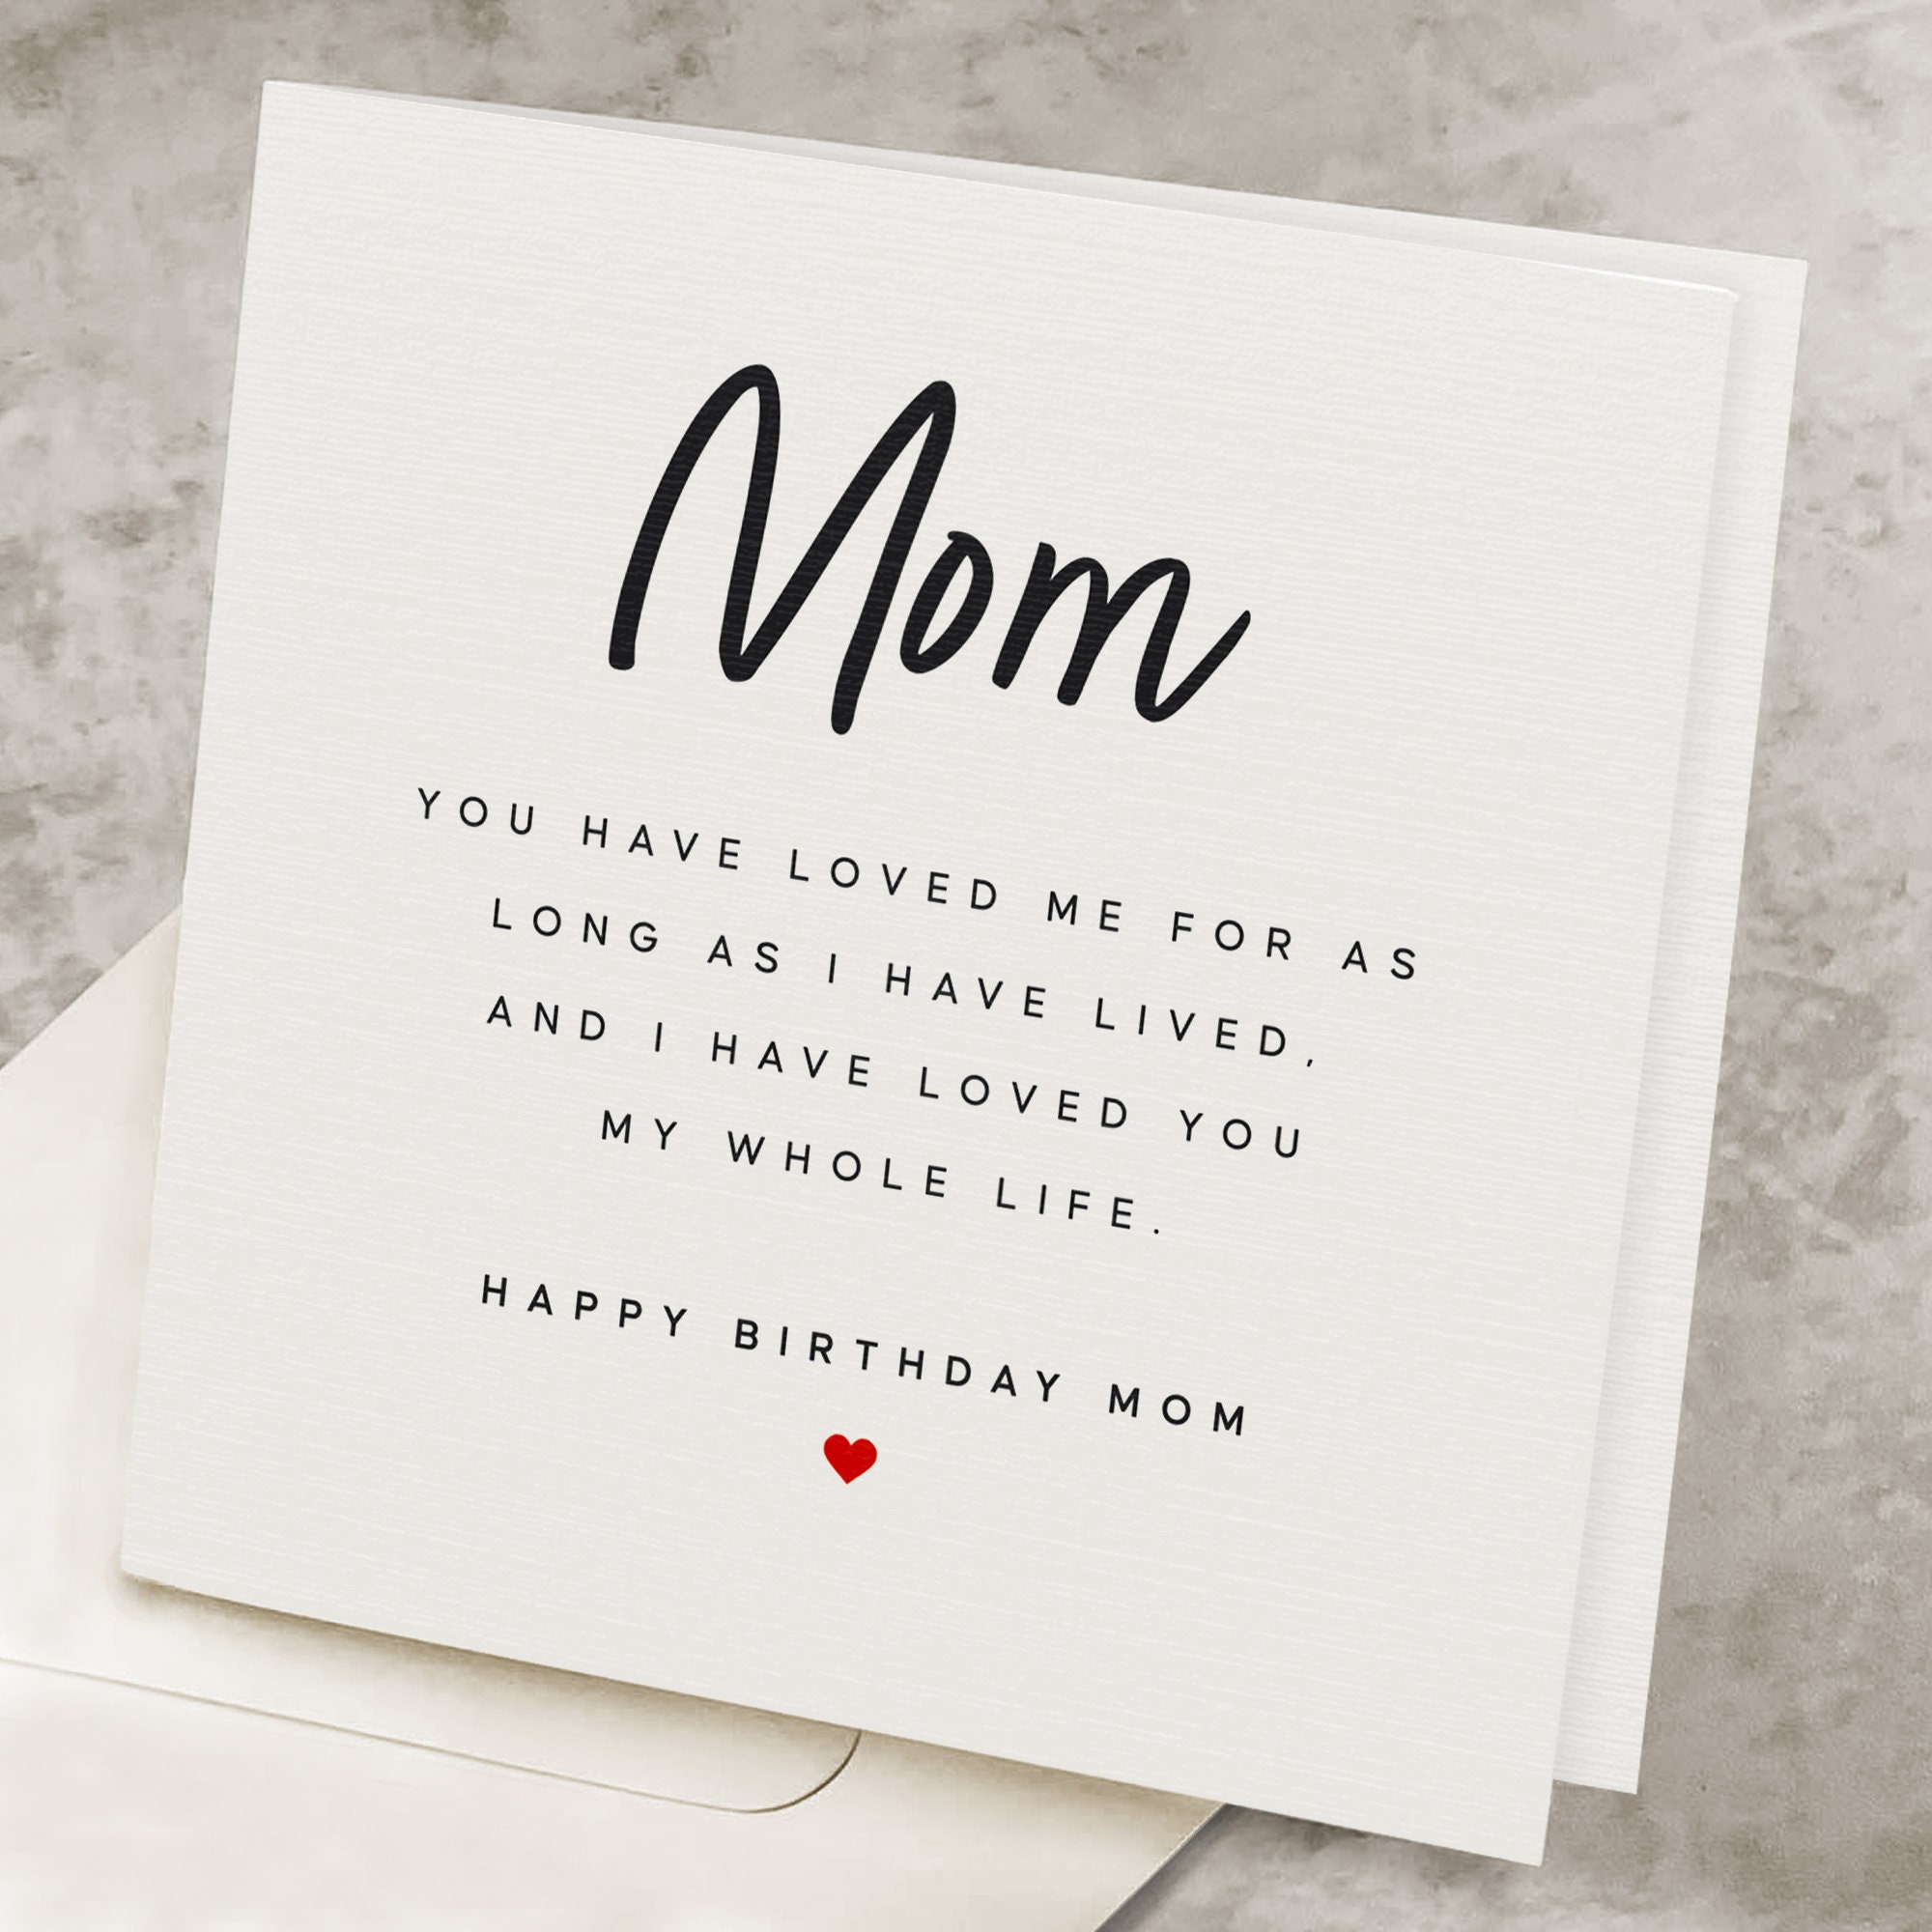 Cute Birthday Card For Mom With Poem, Mother's Birthday Card With Loving  Message, Birthday Card For Mommy, From Daughter/Son HB035